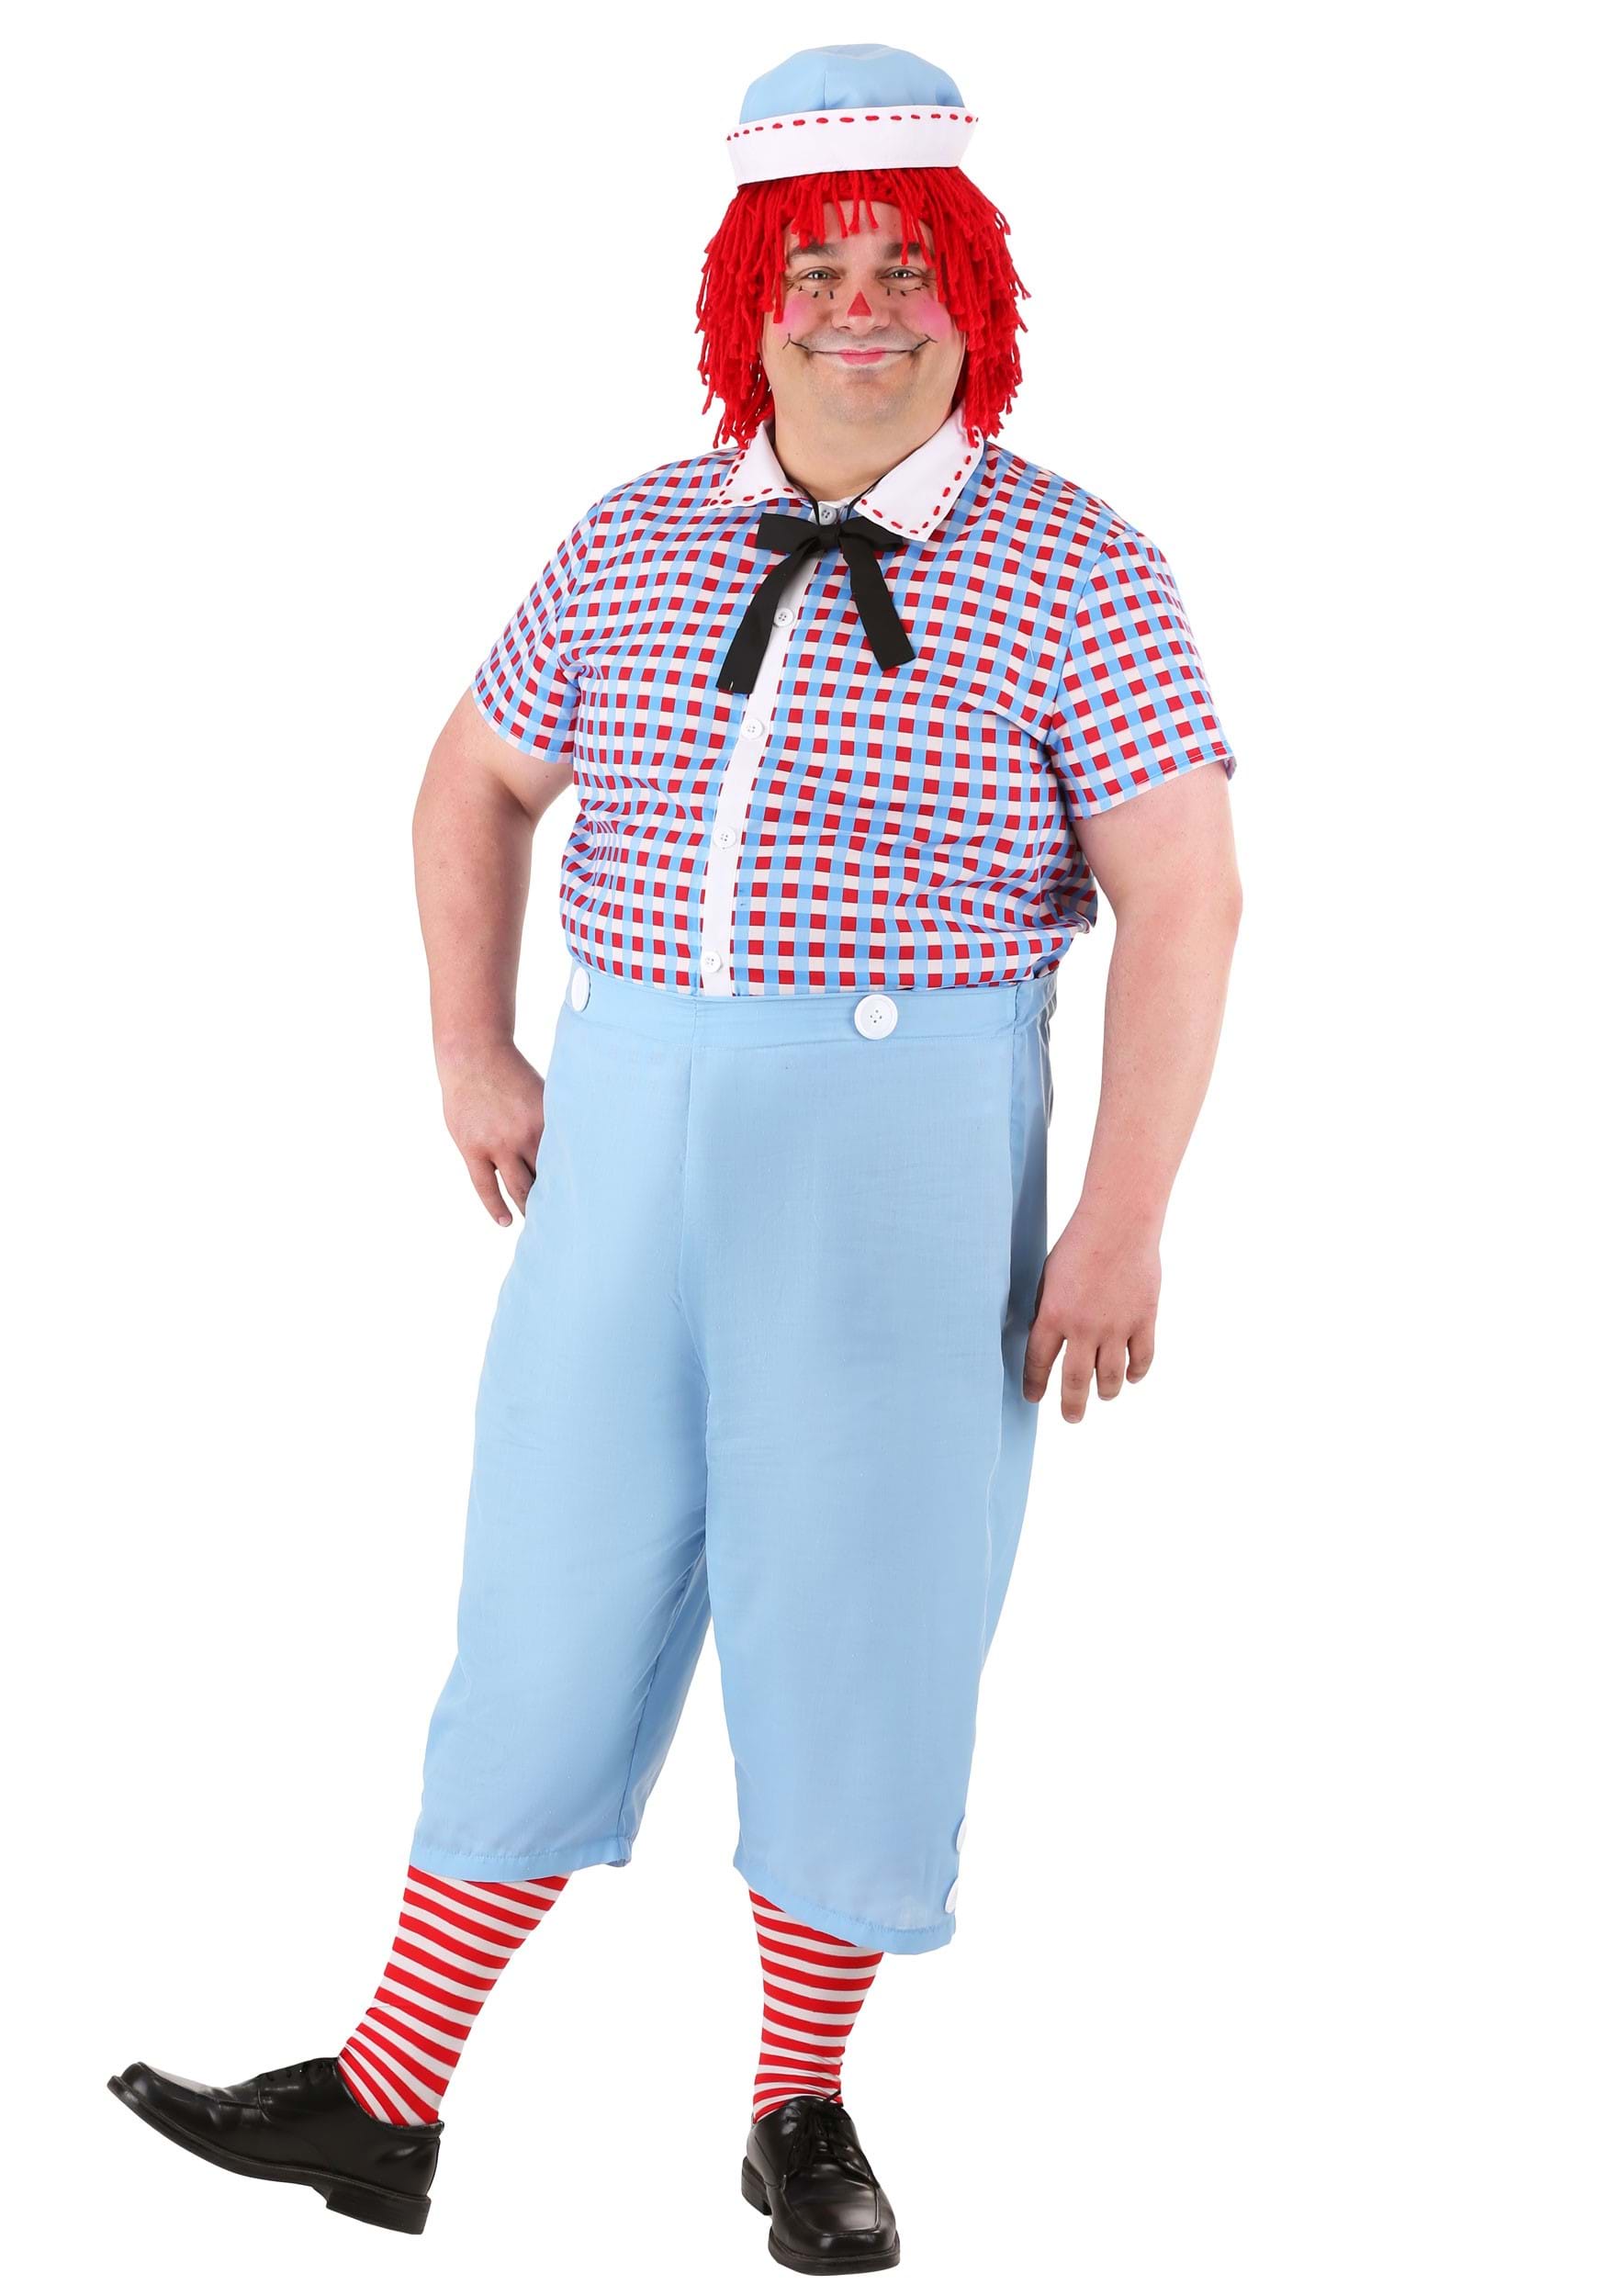 Photos - Fancy Dress FUN Costumes Plus Size Raggedy Andy Men's Costume Red/Blue/White F